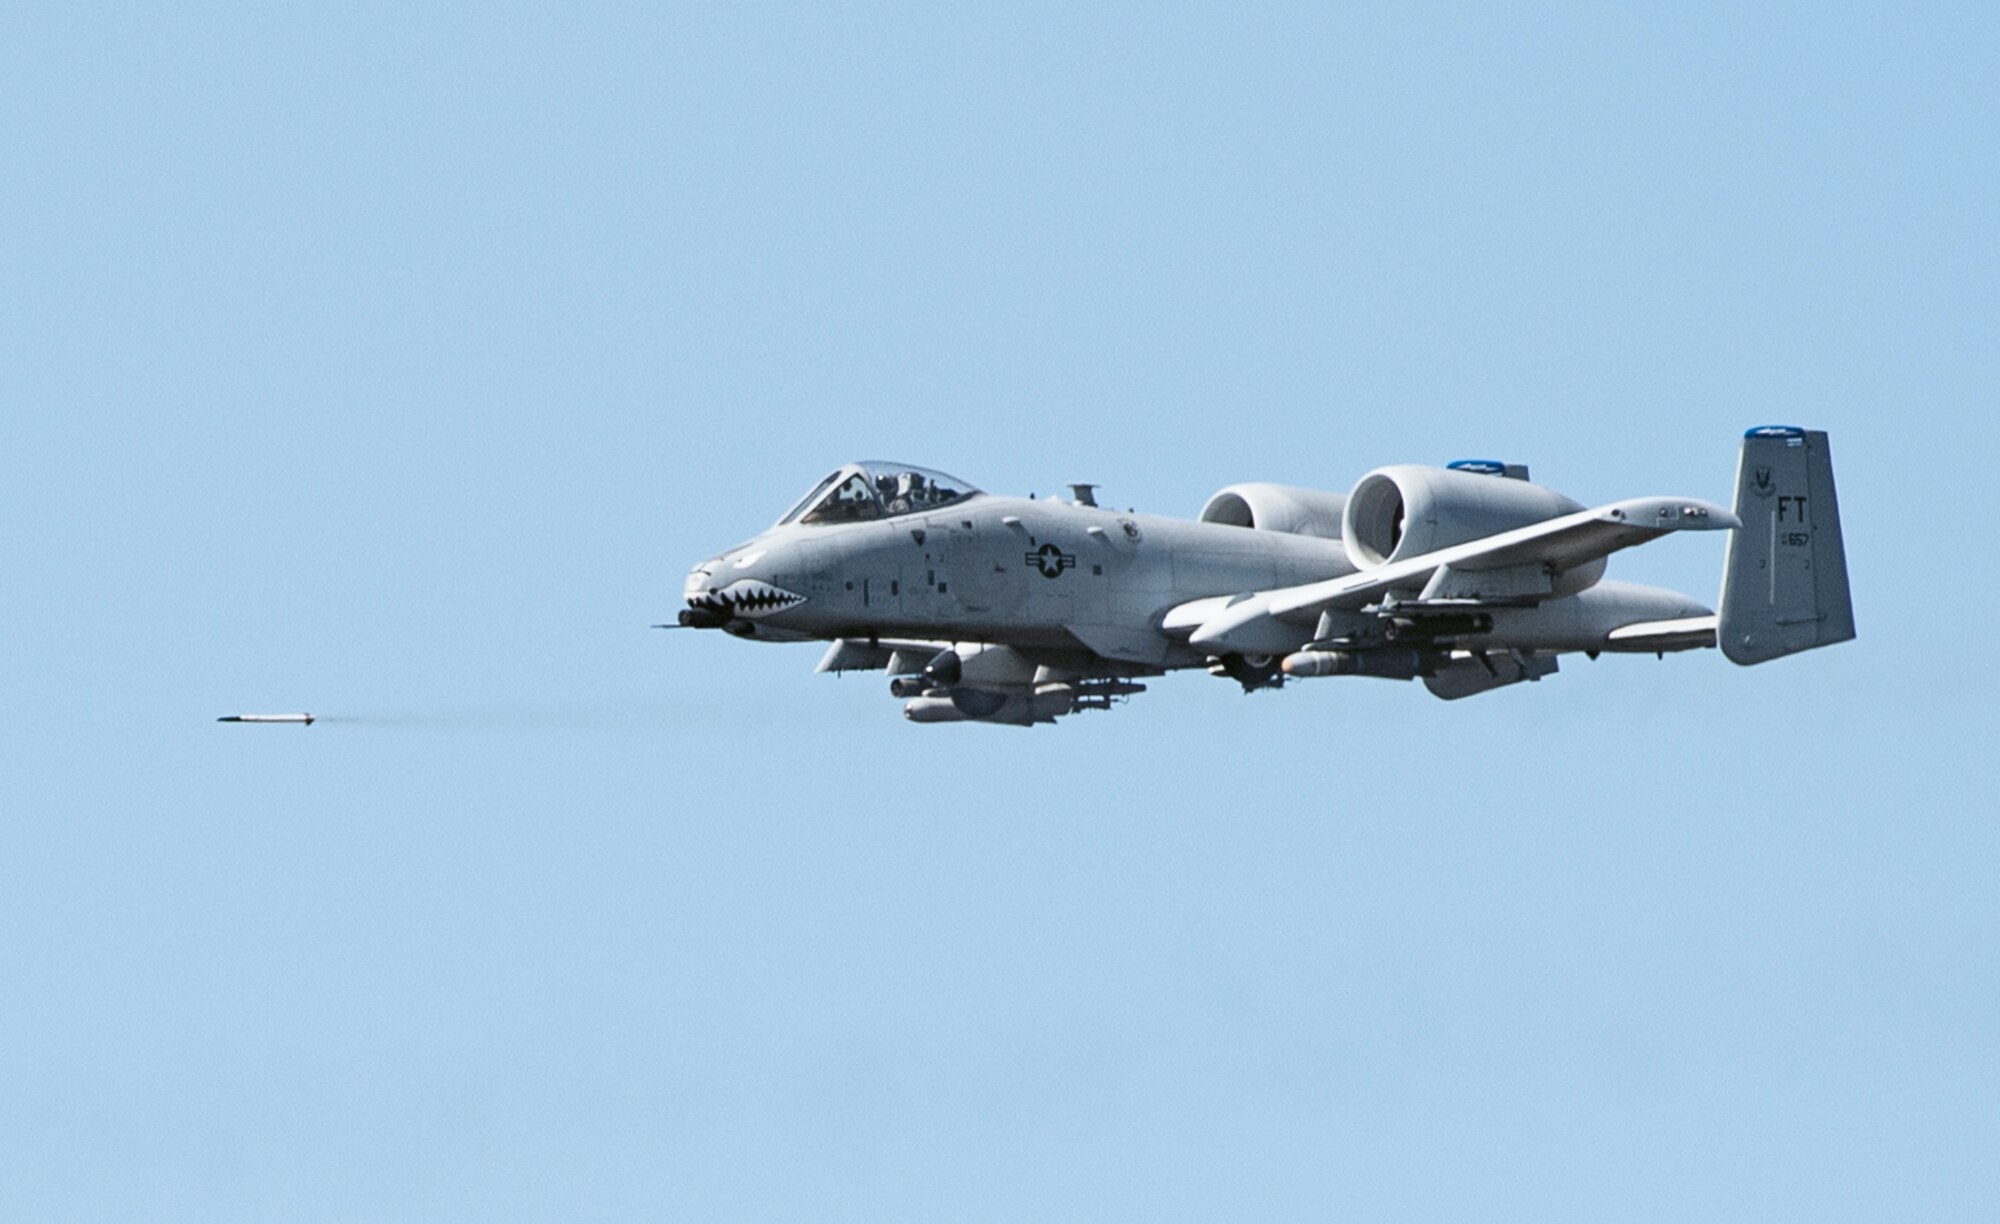 An A-10 Thunderbolt II fires an air-to-surface missile over the Grand Bay Bombing and Gunnery Range at Moody Air Force Base, Ga., Feb. 11, 2016. Multiple U.S. Air Force aircraft within Air Combat Command conducted joint aerial training that showcased the aircrafts tactical air and ground maneuvers, as well as its weapons capabilities. (U.S. Air Force photo by Staff Sgt. Brian J. Valencia/Released)